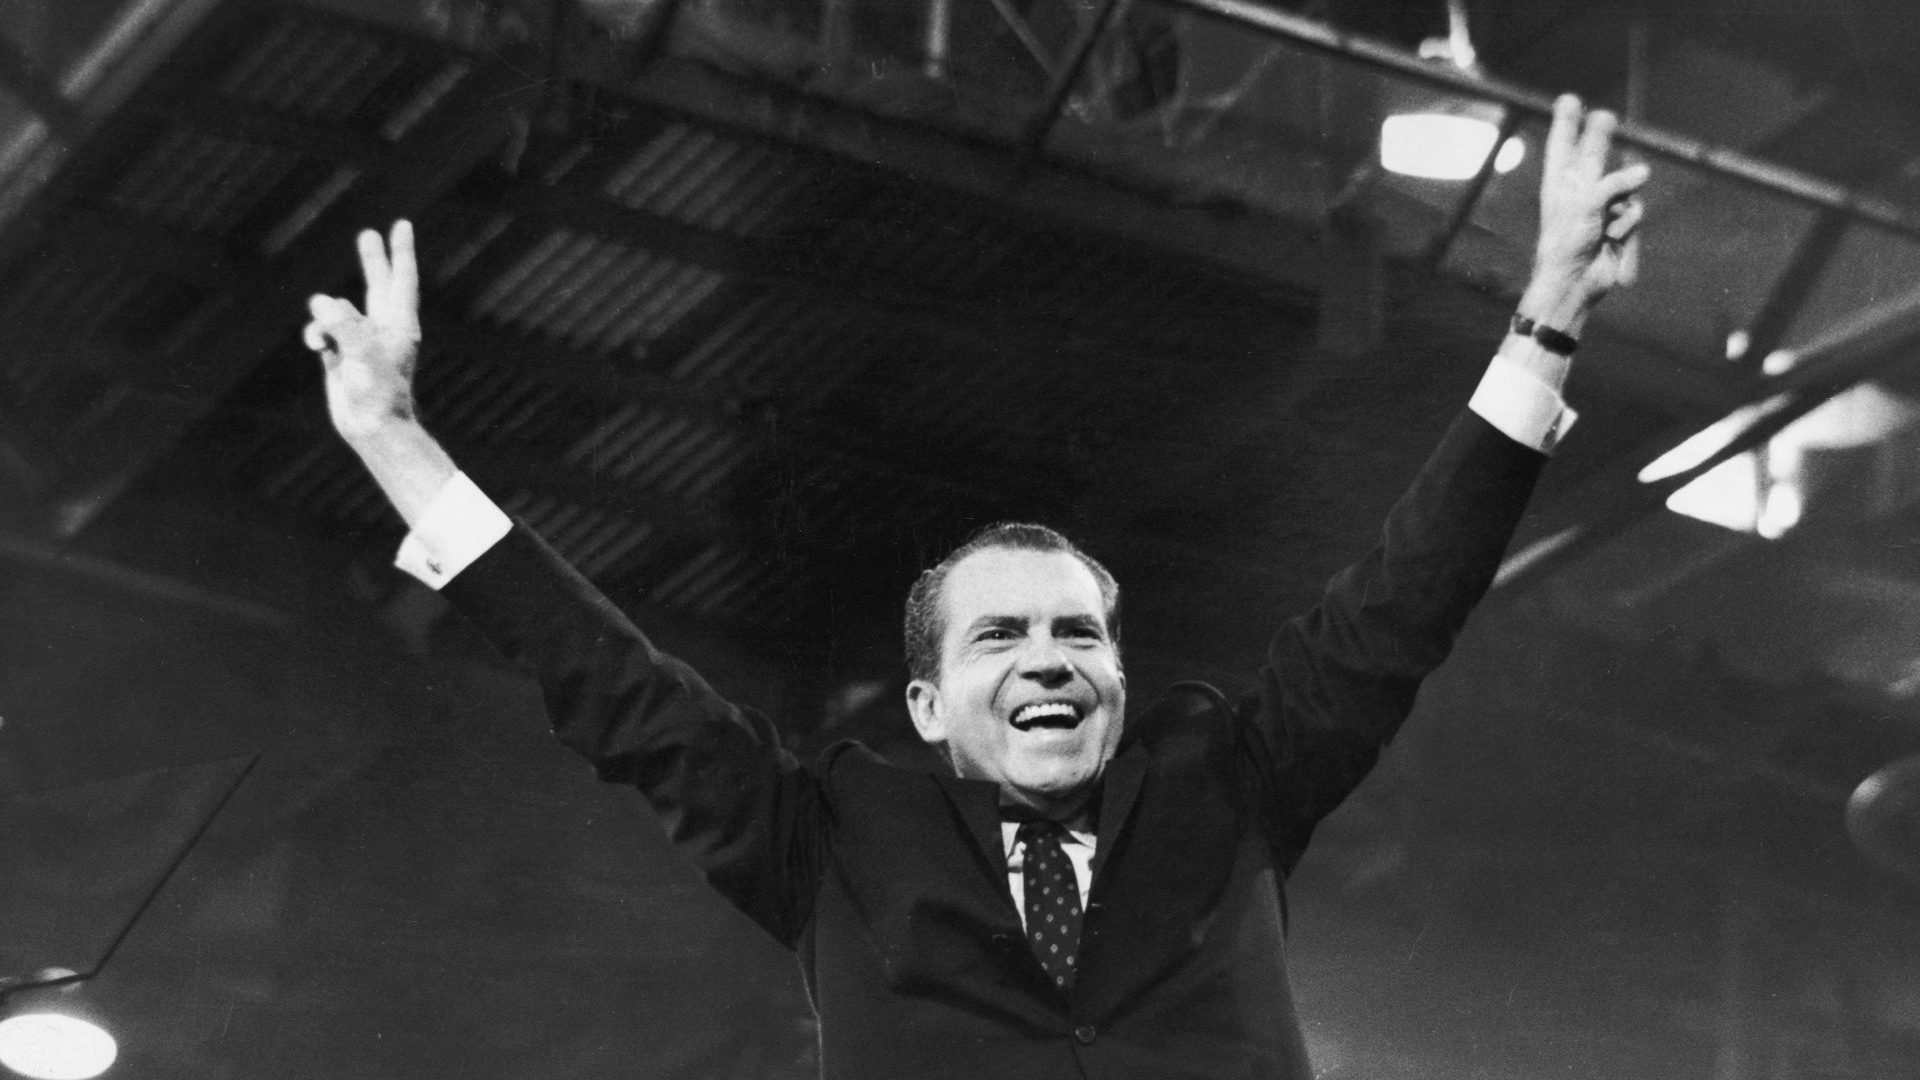 Richard Nixon (1913-1994) gives the 'V' for victory sign after receiving the presidential nomination at the Republican National Convention, Miami, Florida. Photo: Washington Bureau/Getty Images